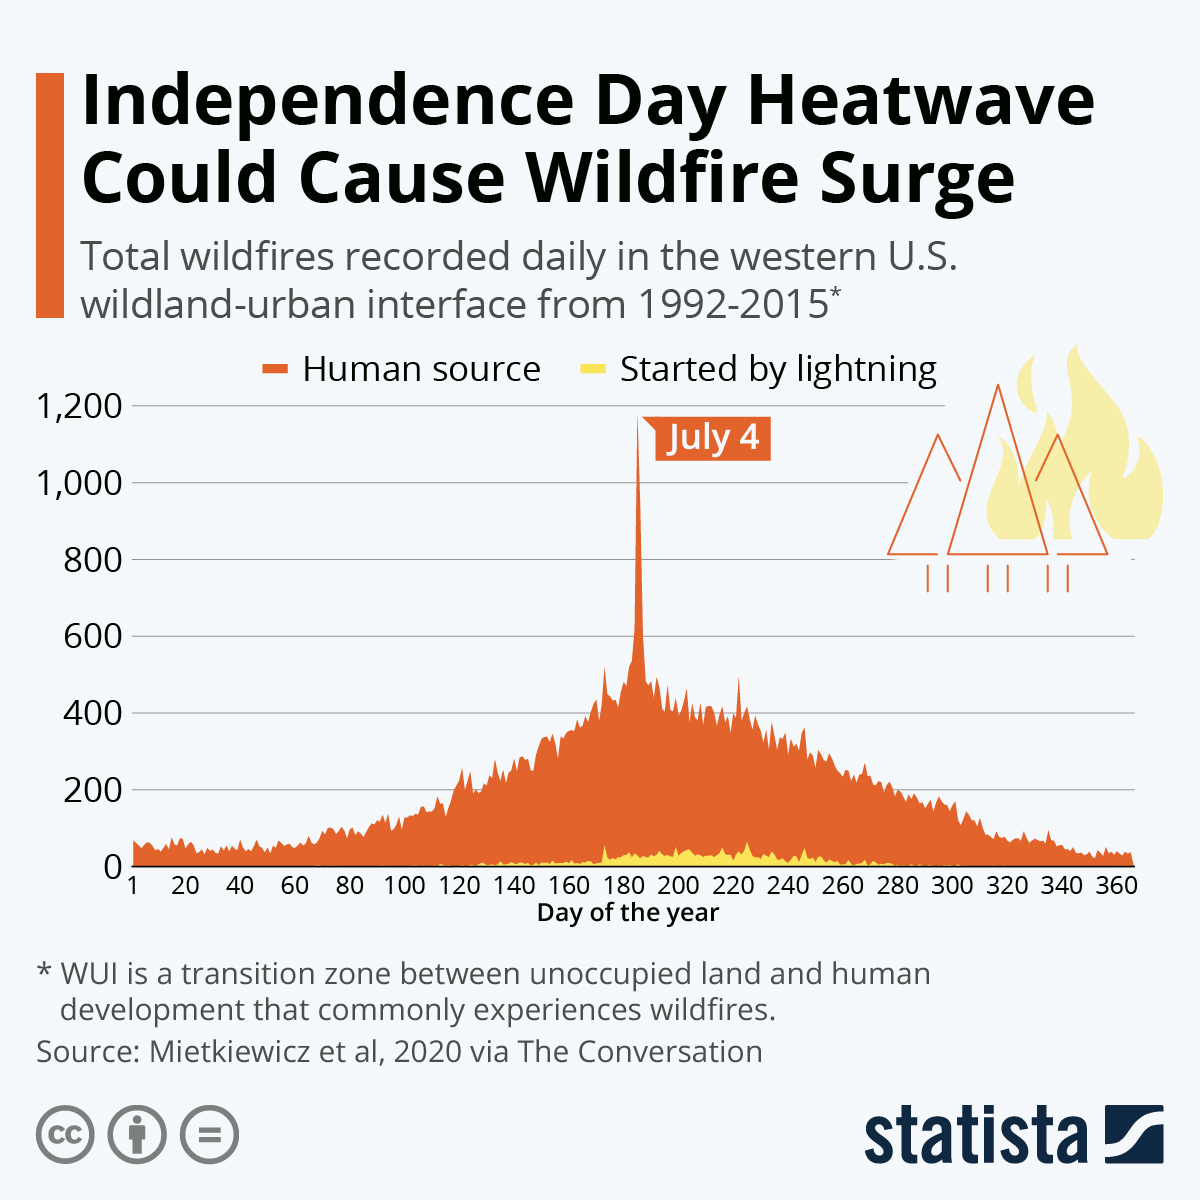 Independence Day Heatwave Could Cause Wildfire Surge